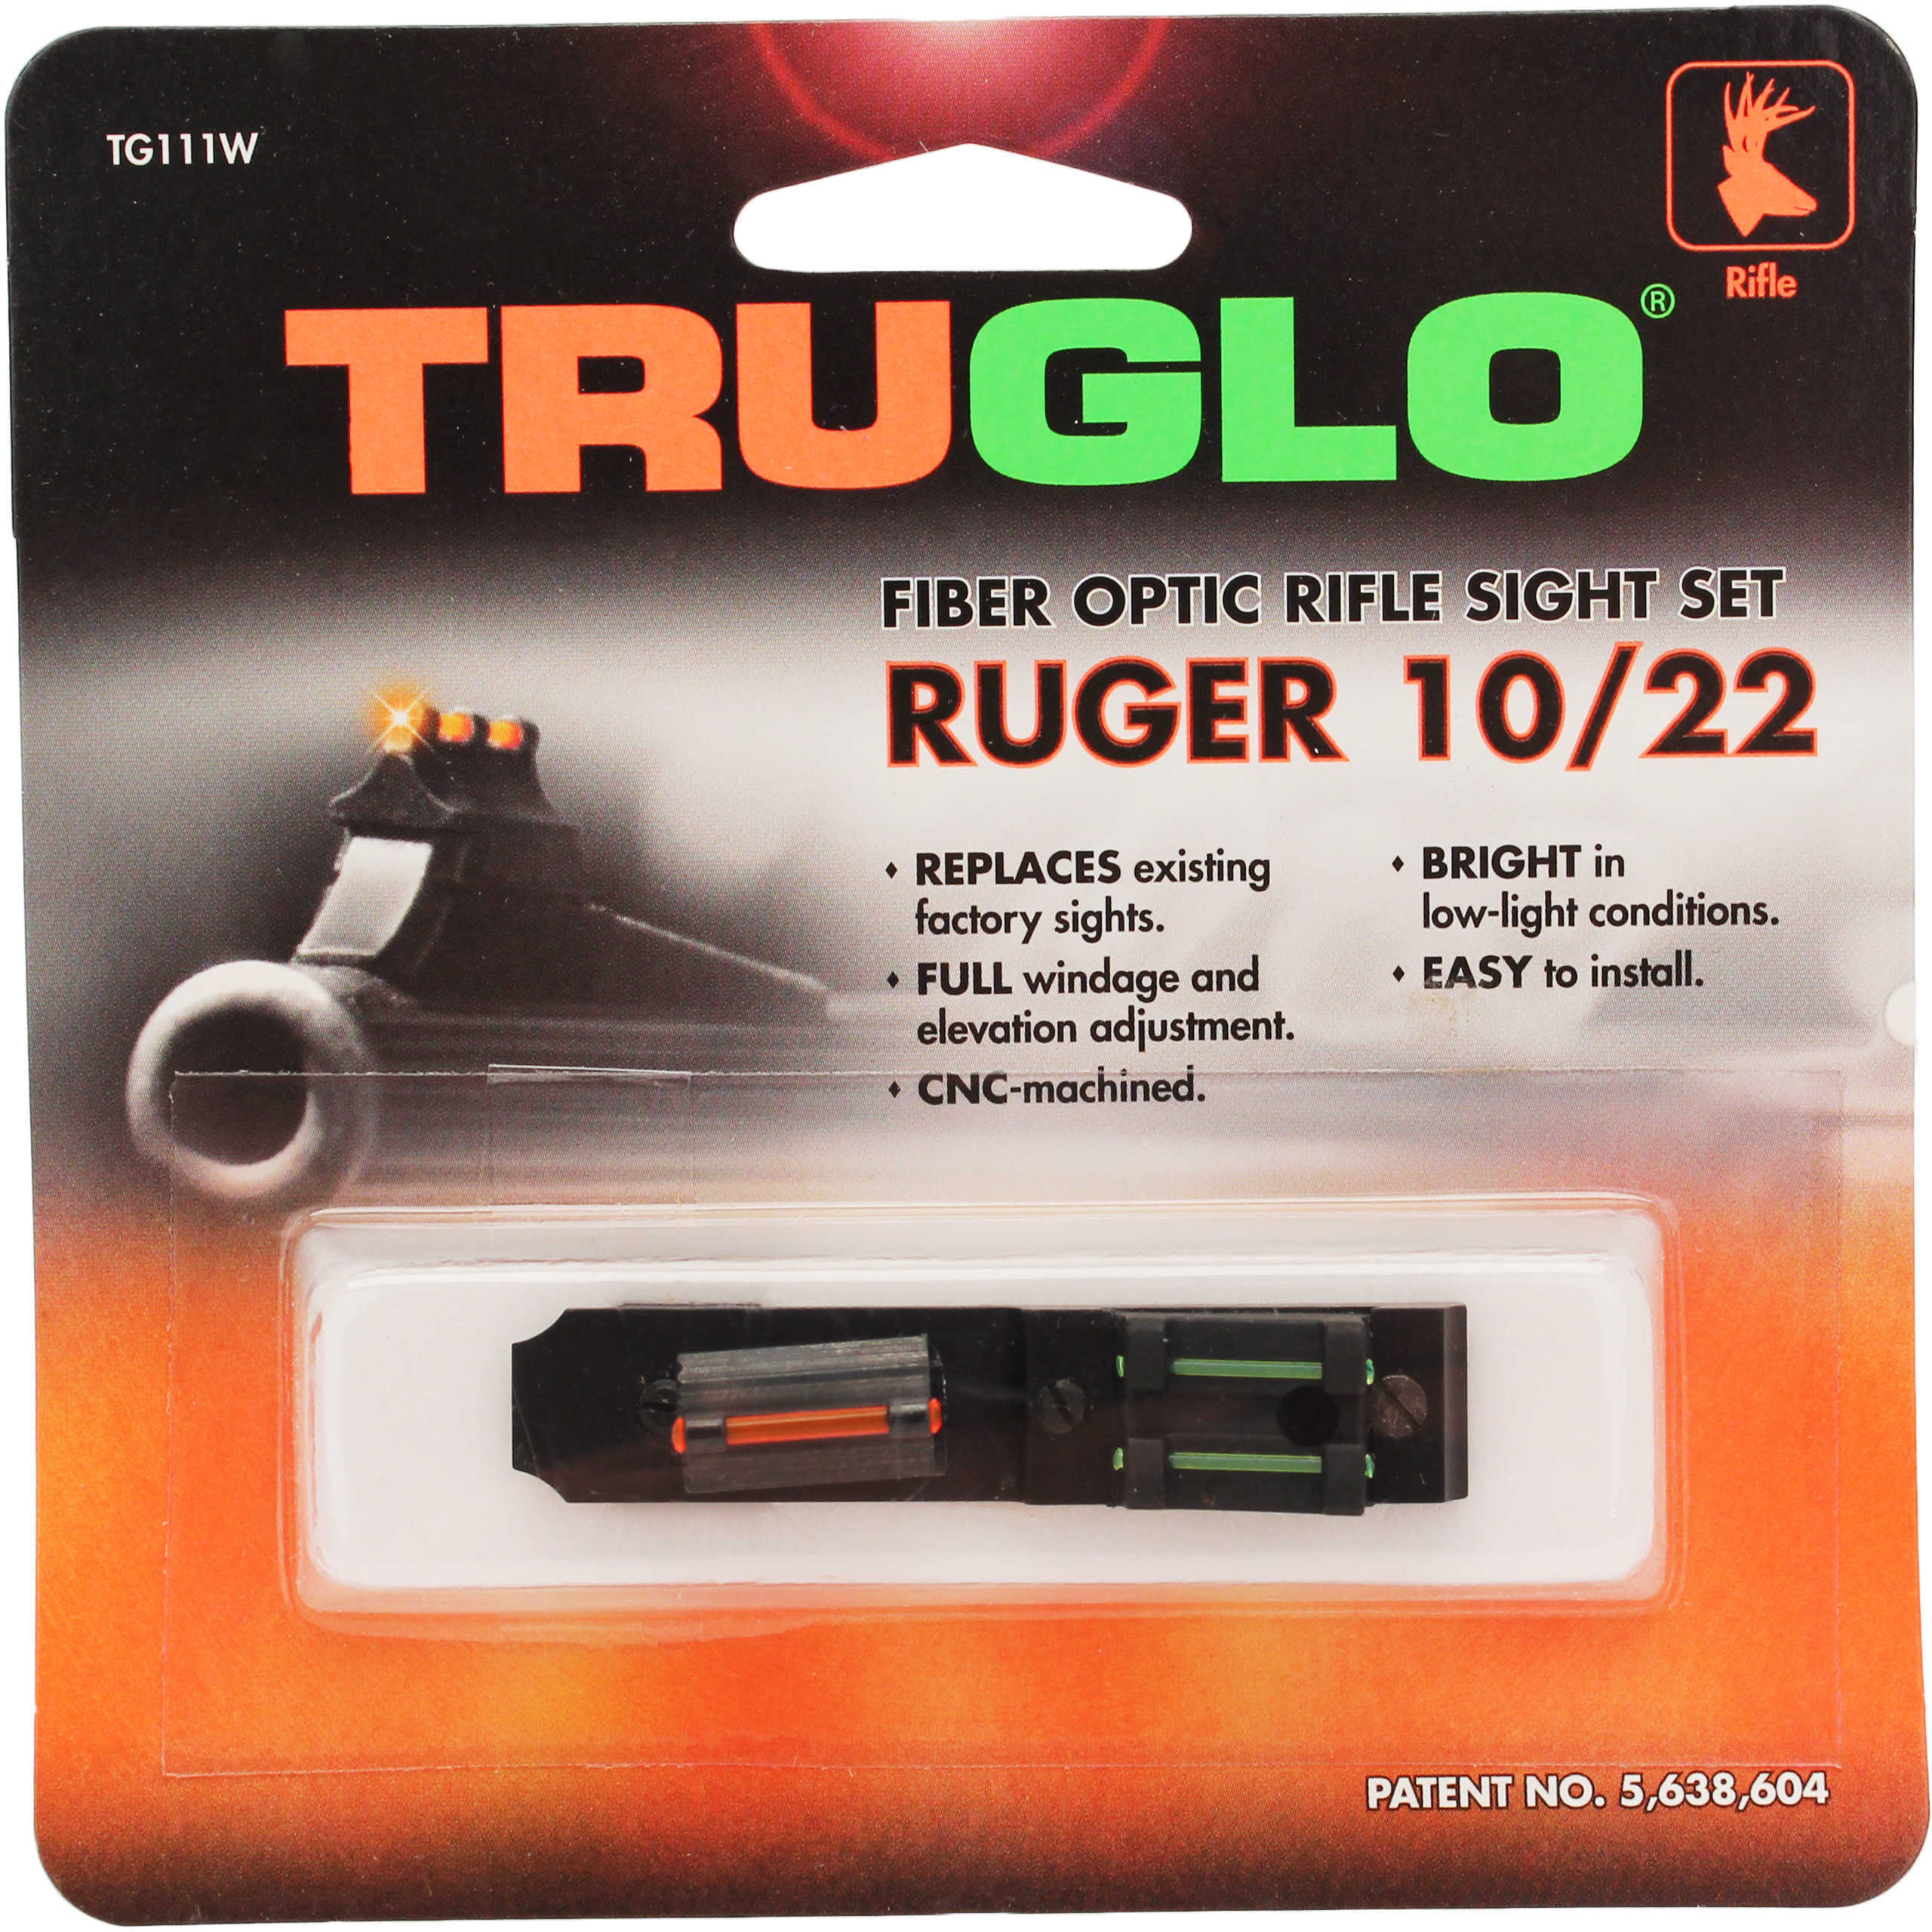 Truglo Rifle Sights For Ruger 10/22 Md: TG111W-img-1